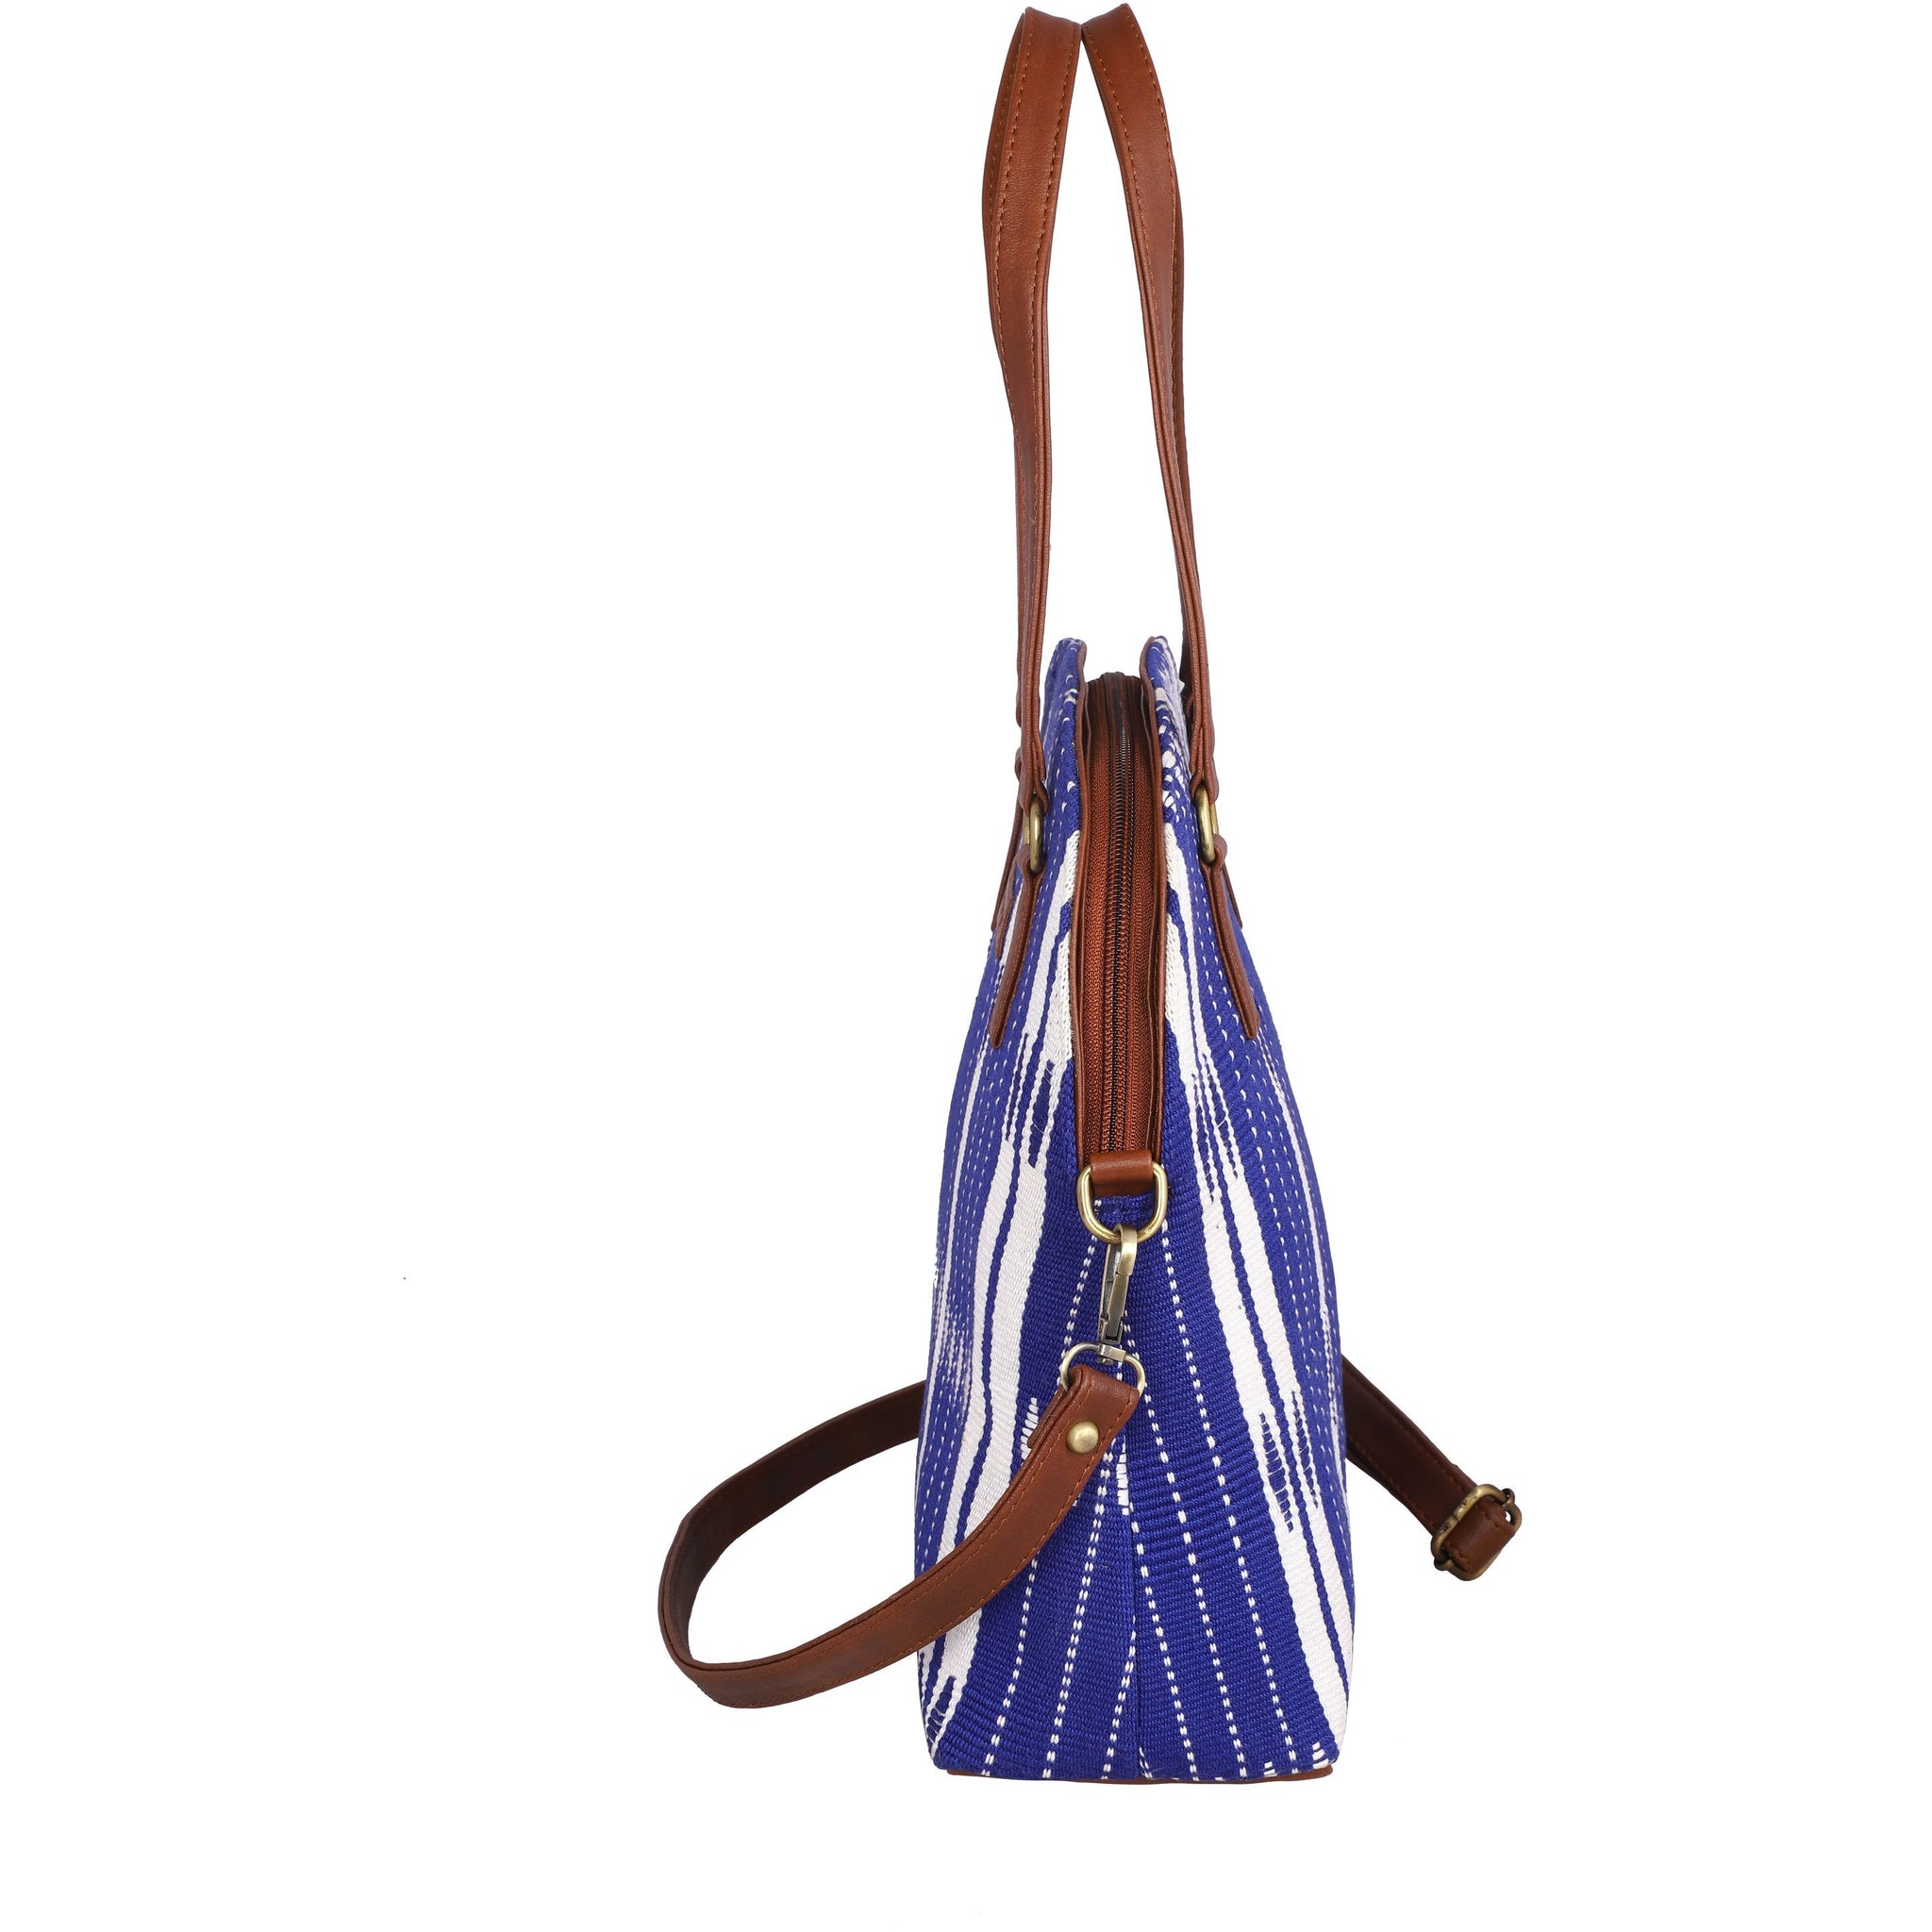 Womens handbag crafted from hill tribe textile, Crossbody bag, Vegan leather bag